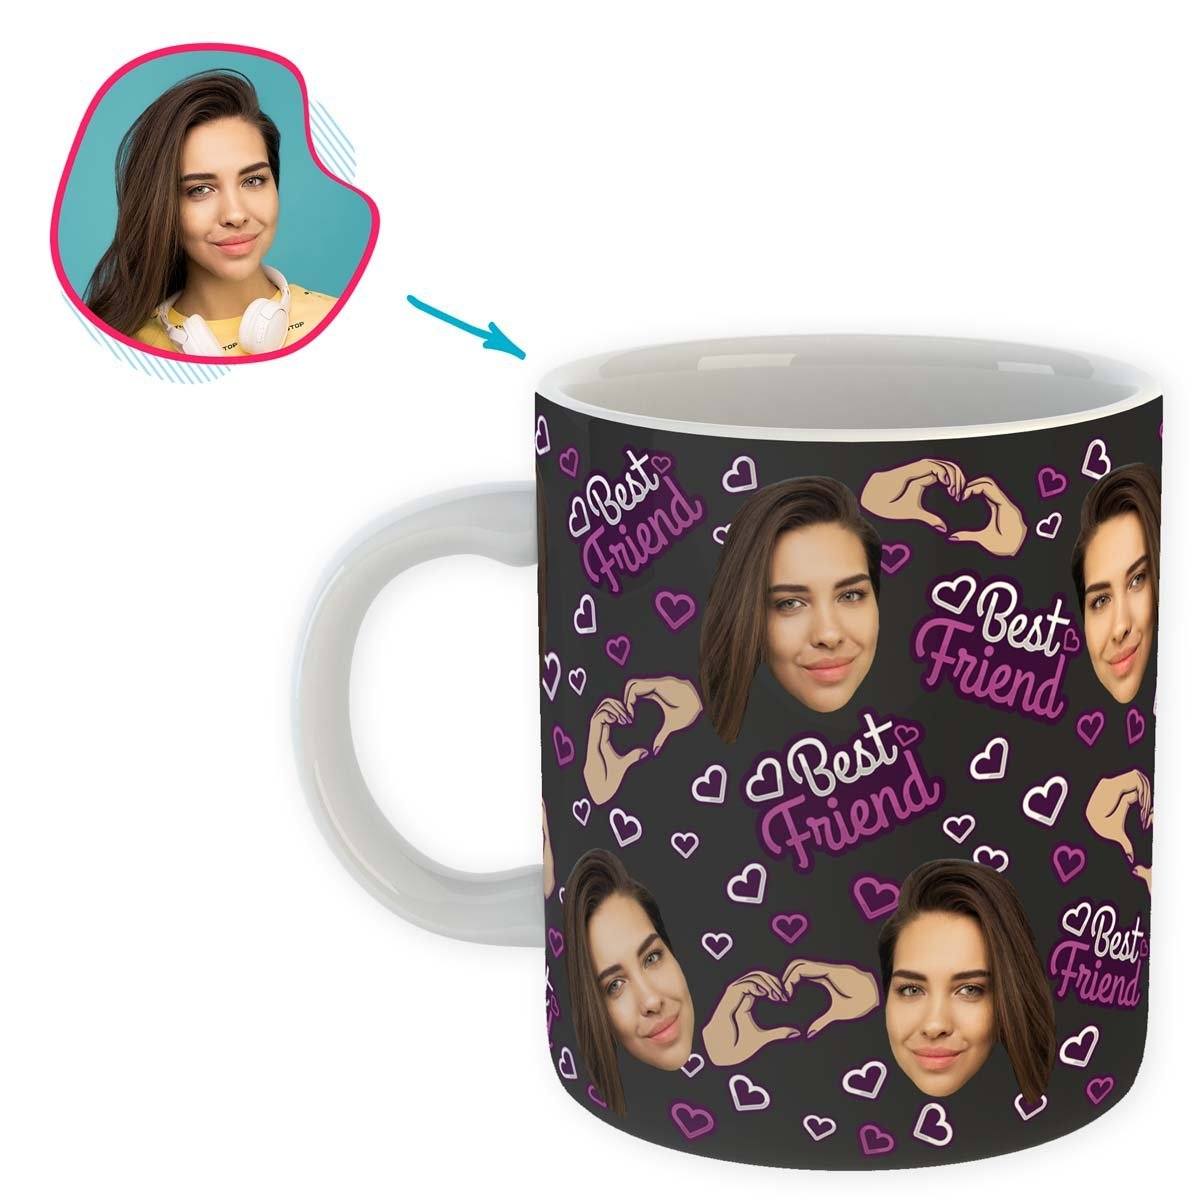 dark BFF for Her mug personalized with photo of face printed on it